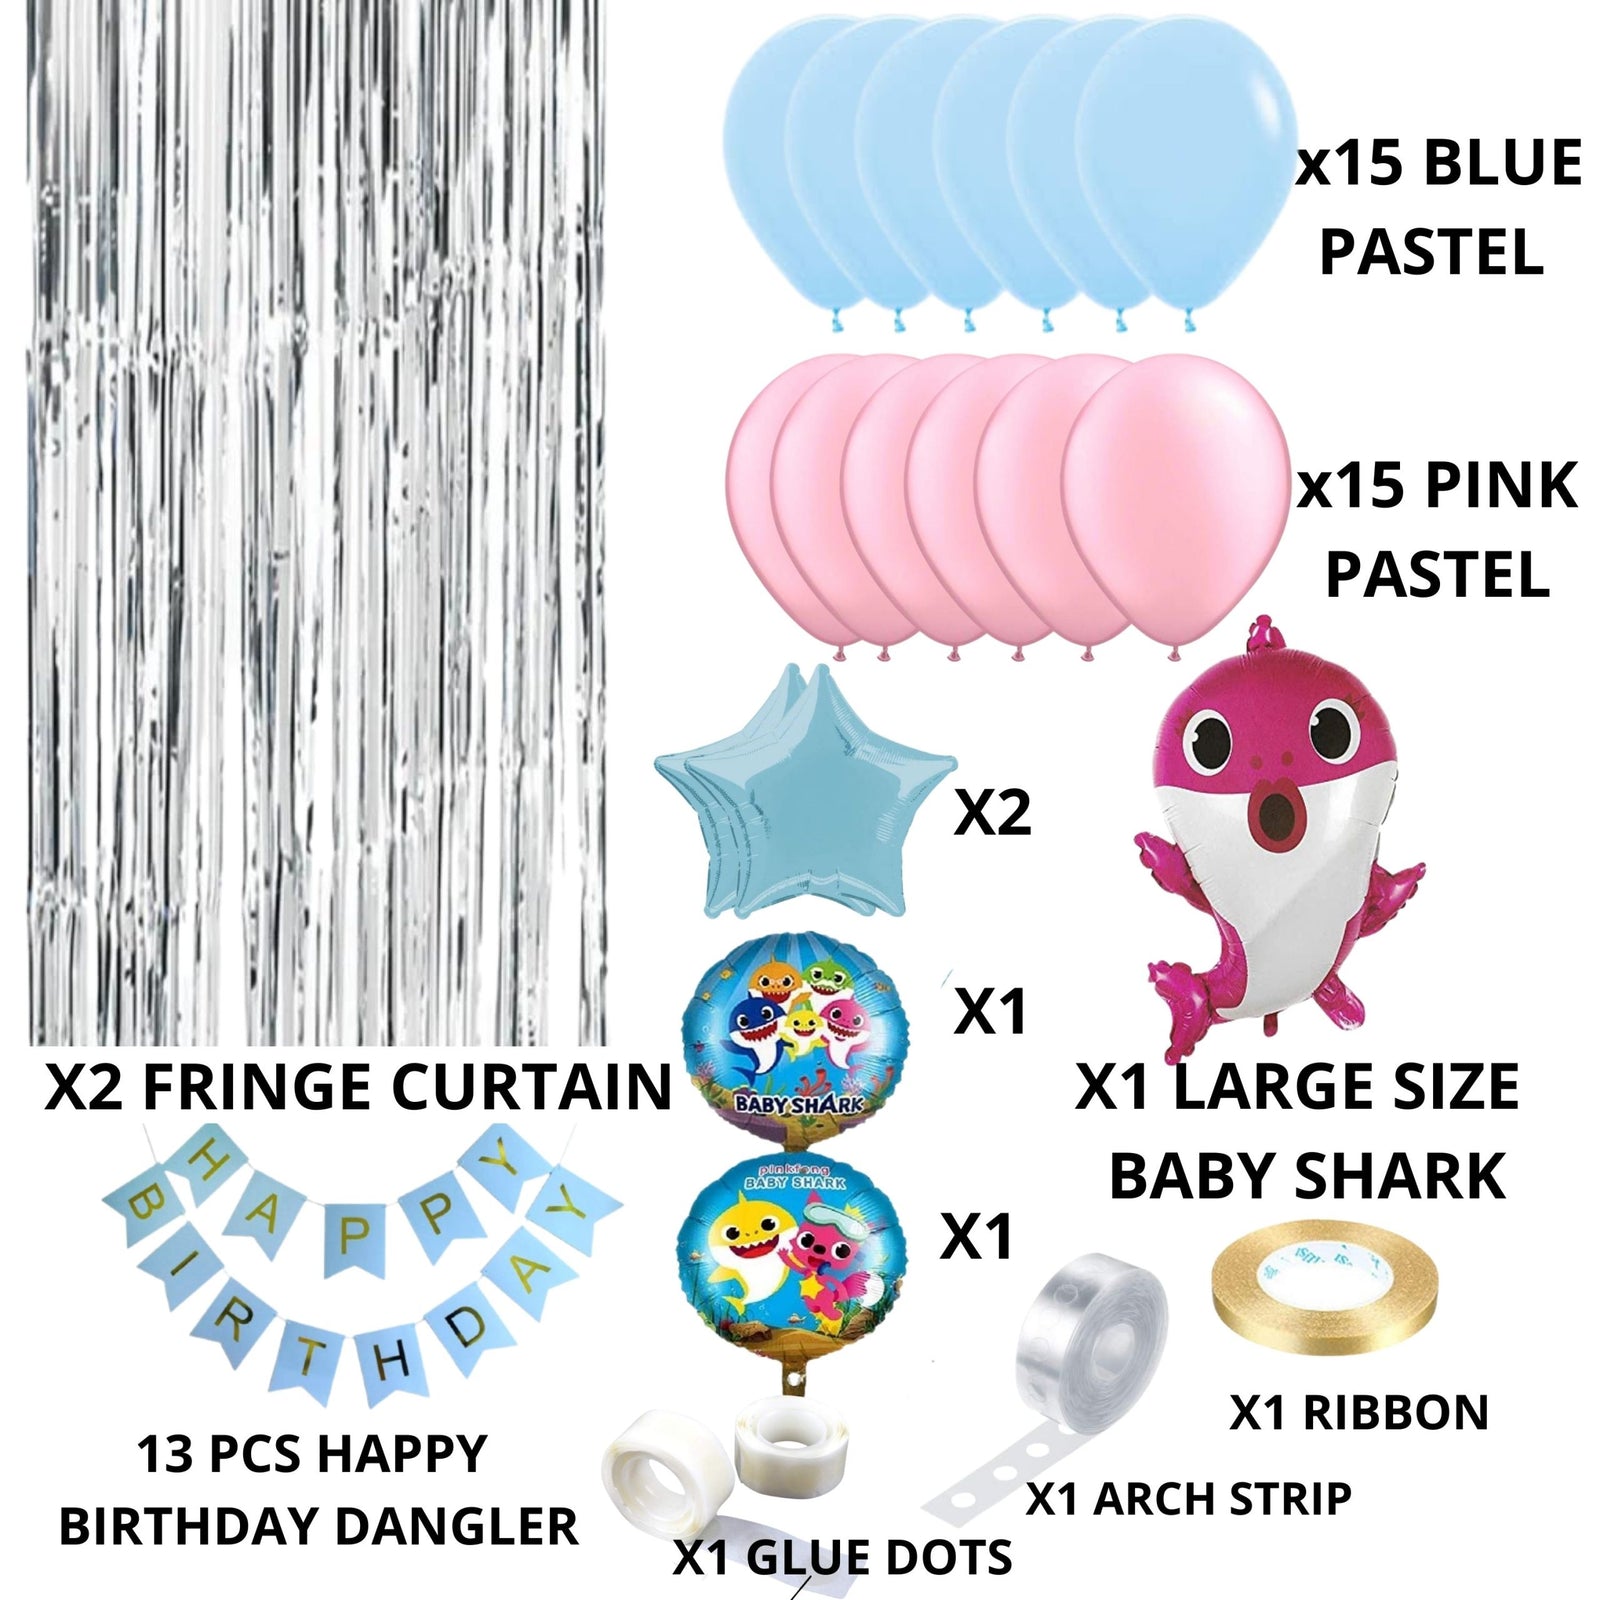 40Pcs Baby Shark Theme Birthday Decoration for Kids Girls Boys, Baby Shark Foil Balloon & Banner, Pastel Pink & Pastel Blue Balloons, Silver Curtains